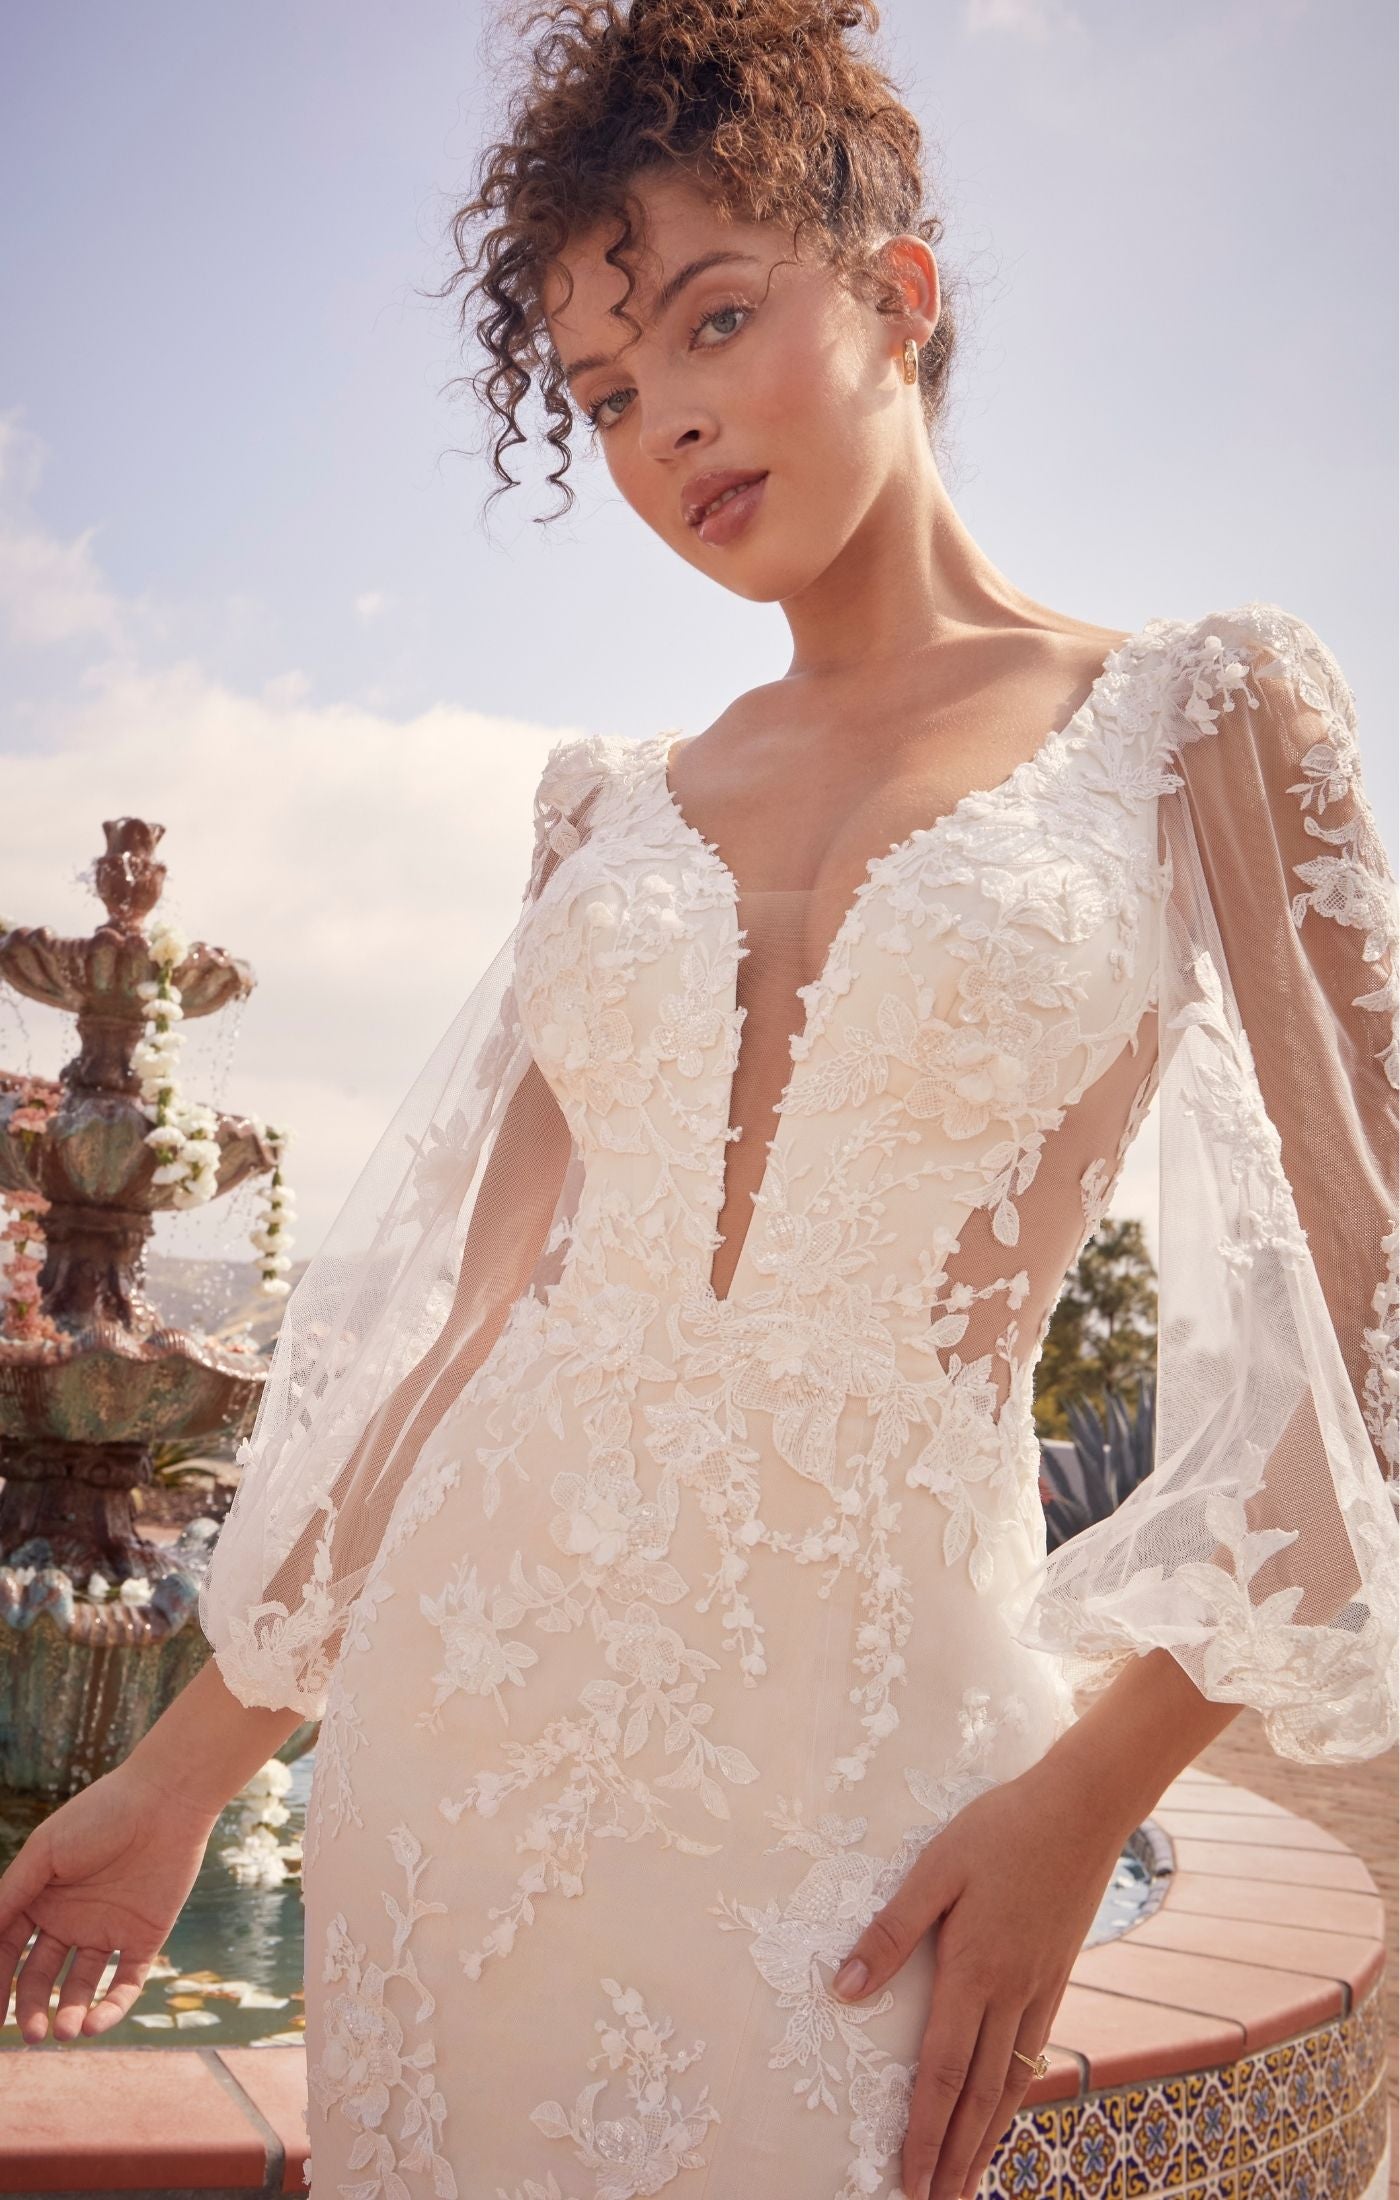 Casablanca Beloved BL434 Mermaid Sheer Long Sleeve V-Neck Open Back Lace Floral Tulle Train Wedding Gown. Undeniably feminine, Montie is the perfect mix between romantic floral lace motifs and figure flattering silhouettes. Perfect for the outgoing yet romantic bride, Montie’s plunging V neckline and curve sculpt lining bodice is contrasted with delicate feminine floral beaded & sequined lace, met with illusion balloon sleeves.